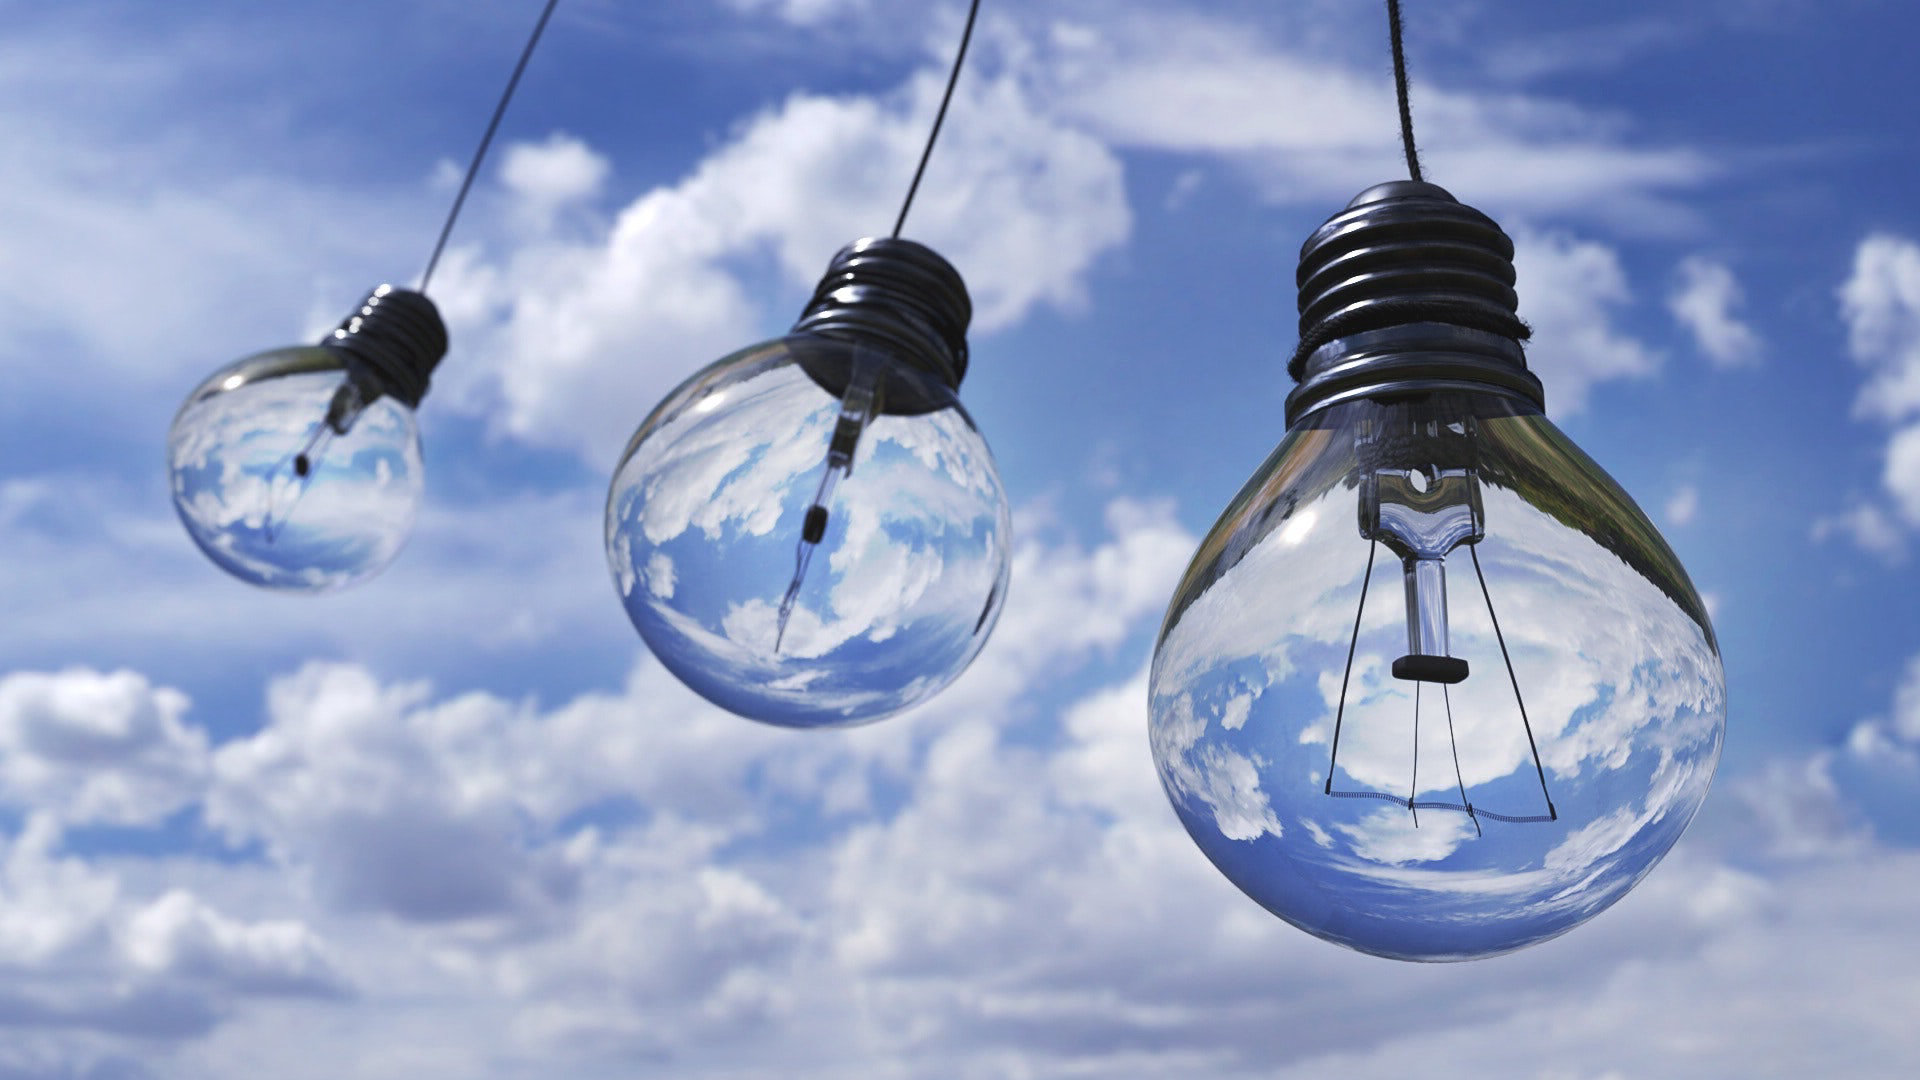 Three transparent lightbulbs in front of a blue cloudy sky